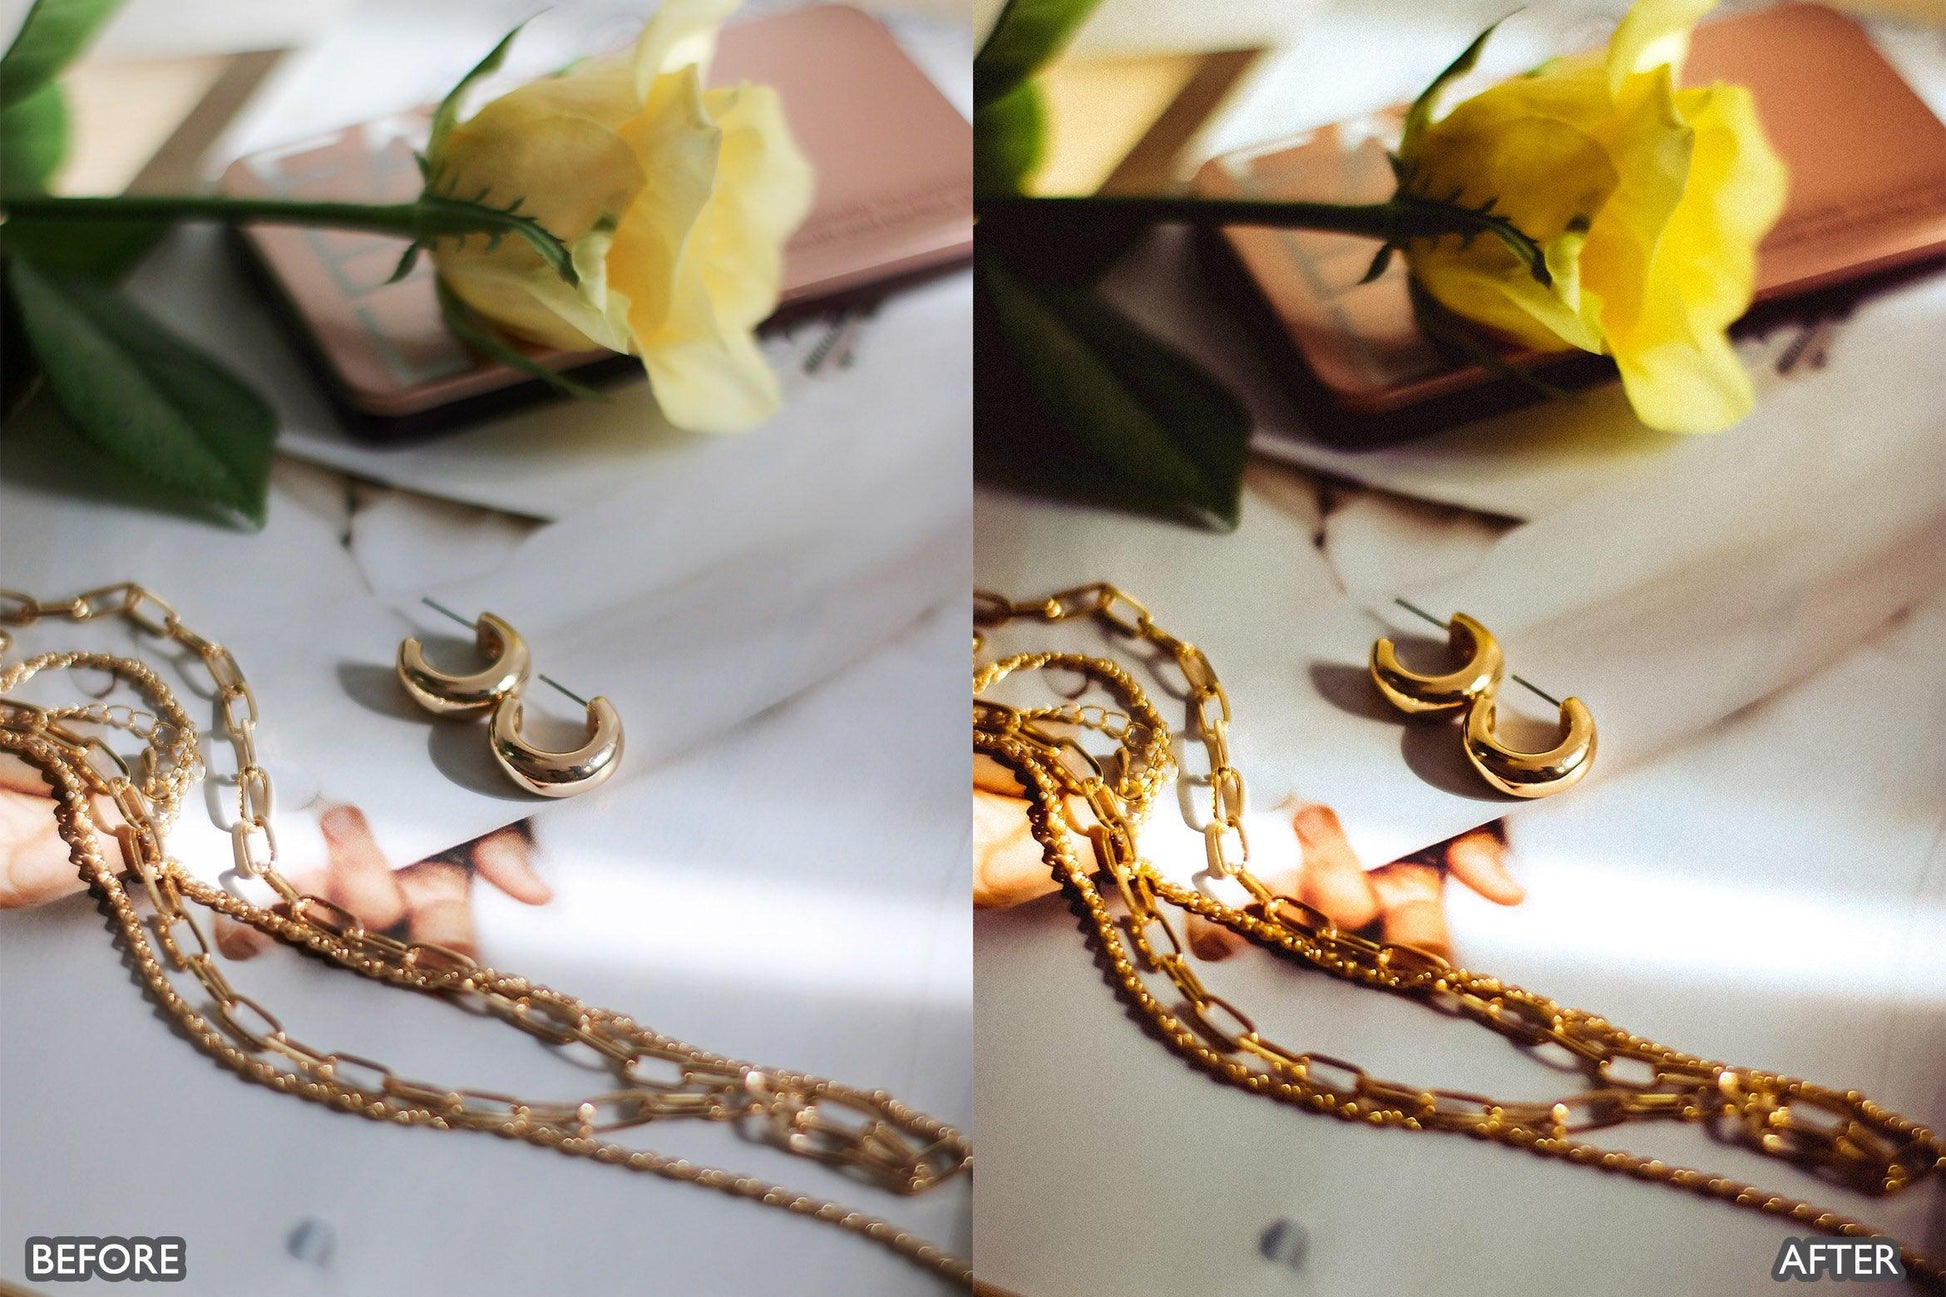 Jewelry Product Photography Lightroom Presets - adobe lightroom presets, black presets, Cinematic Presets, instagram presets, jewelry presets, lightroom presets, Minimalist presets, Monochrome presets, presets before and after, professional lightroom presets - aaapresets.com